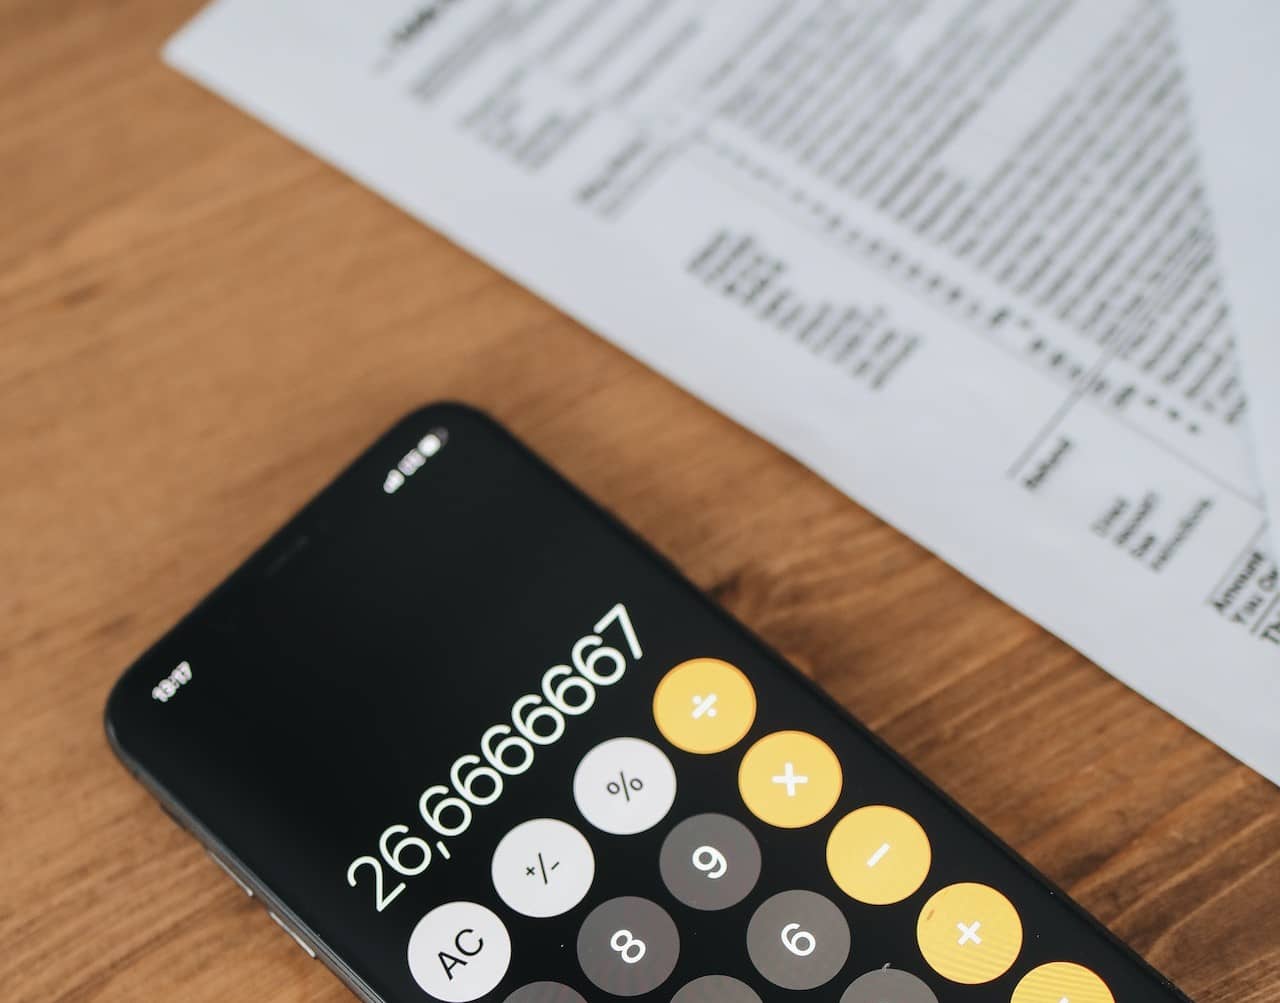 A phone calculator next to forms